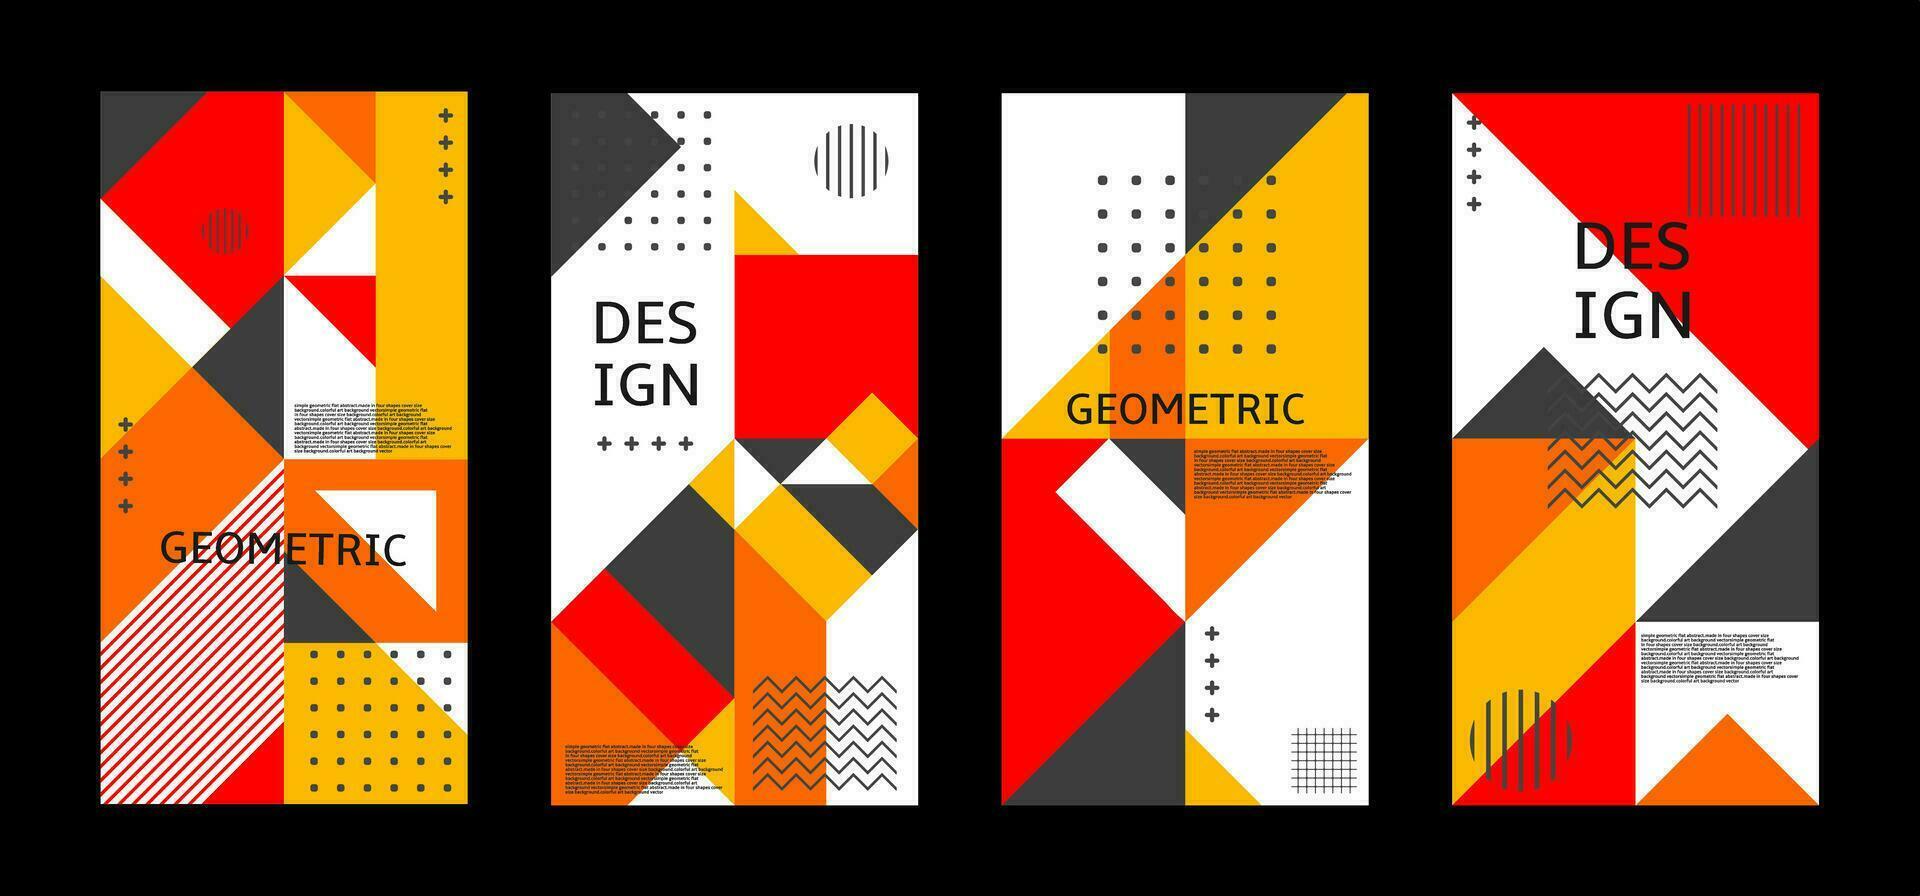 set of abstract geometric pattern poster design with touch of bright color variant composition. Useful for design of posters, presentations, backgrounds, flyers, etc. vector